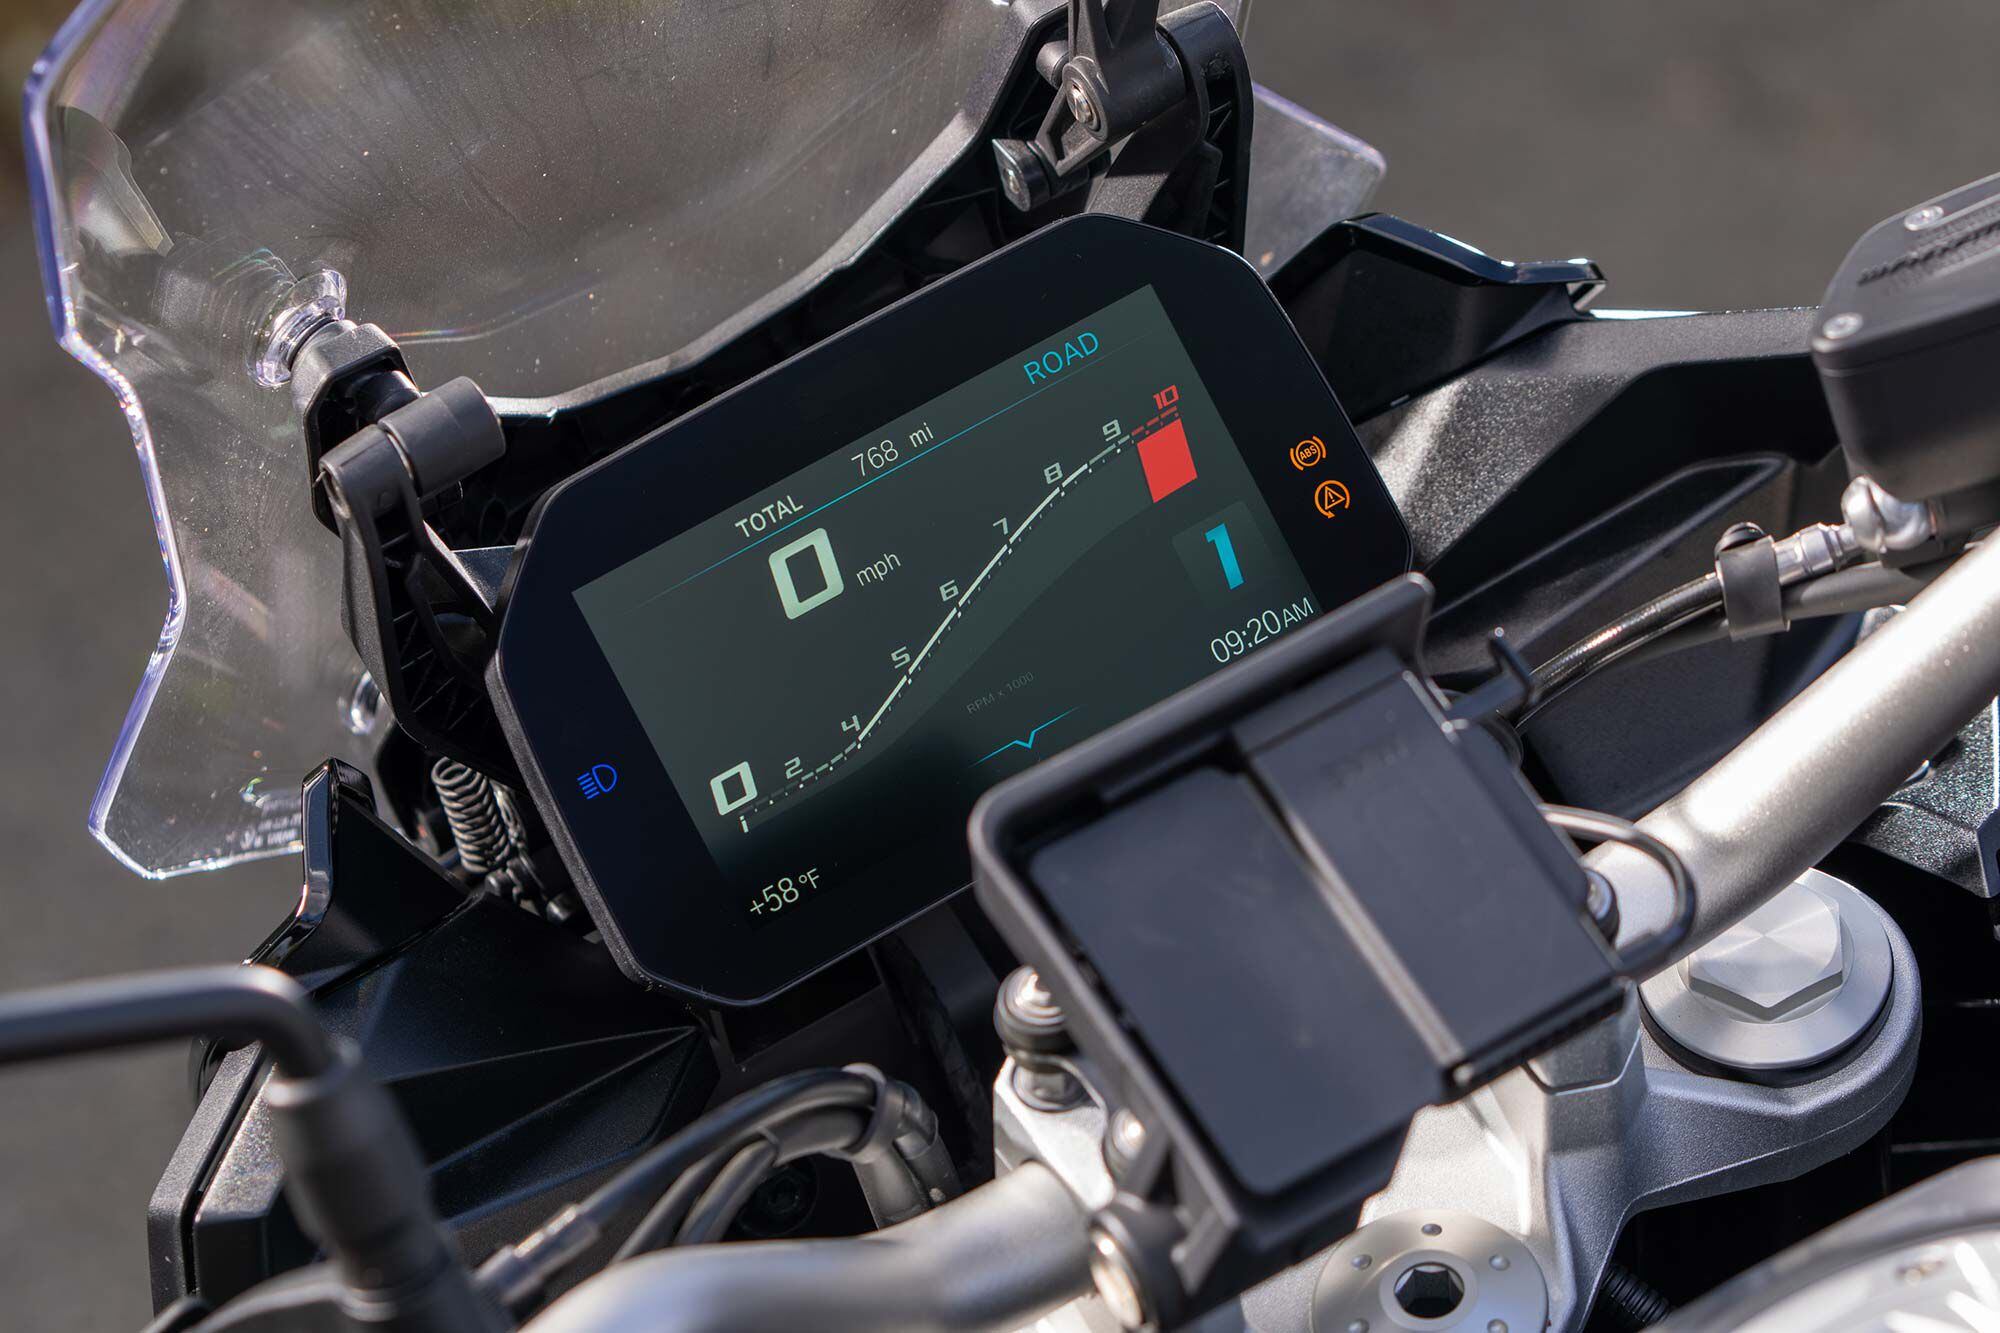 A bright and crisp 6.5-inch color display keeps tabs on vehicle vitals. BMW easily employs the slickest interface in the motorcycle segment today.